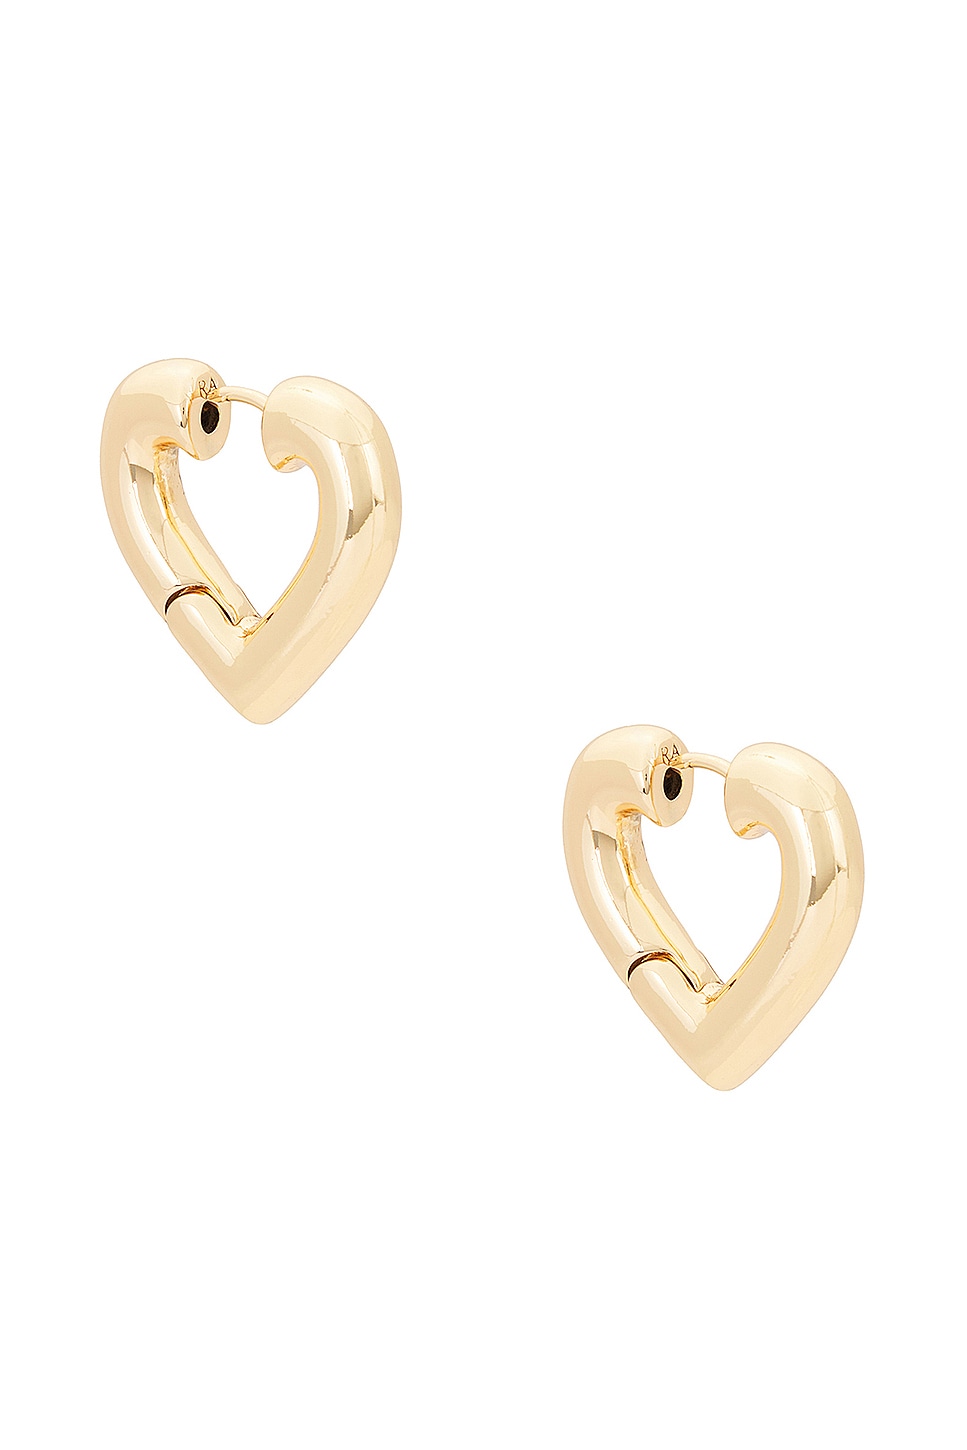 Image 1 of Roxanne Assoulin The Heart Chubbies Earrings in Shiny Gold